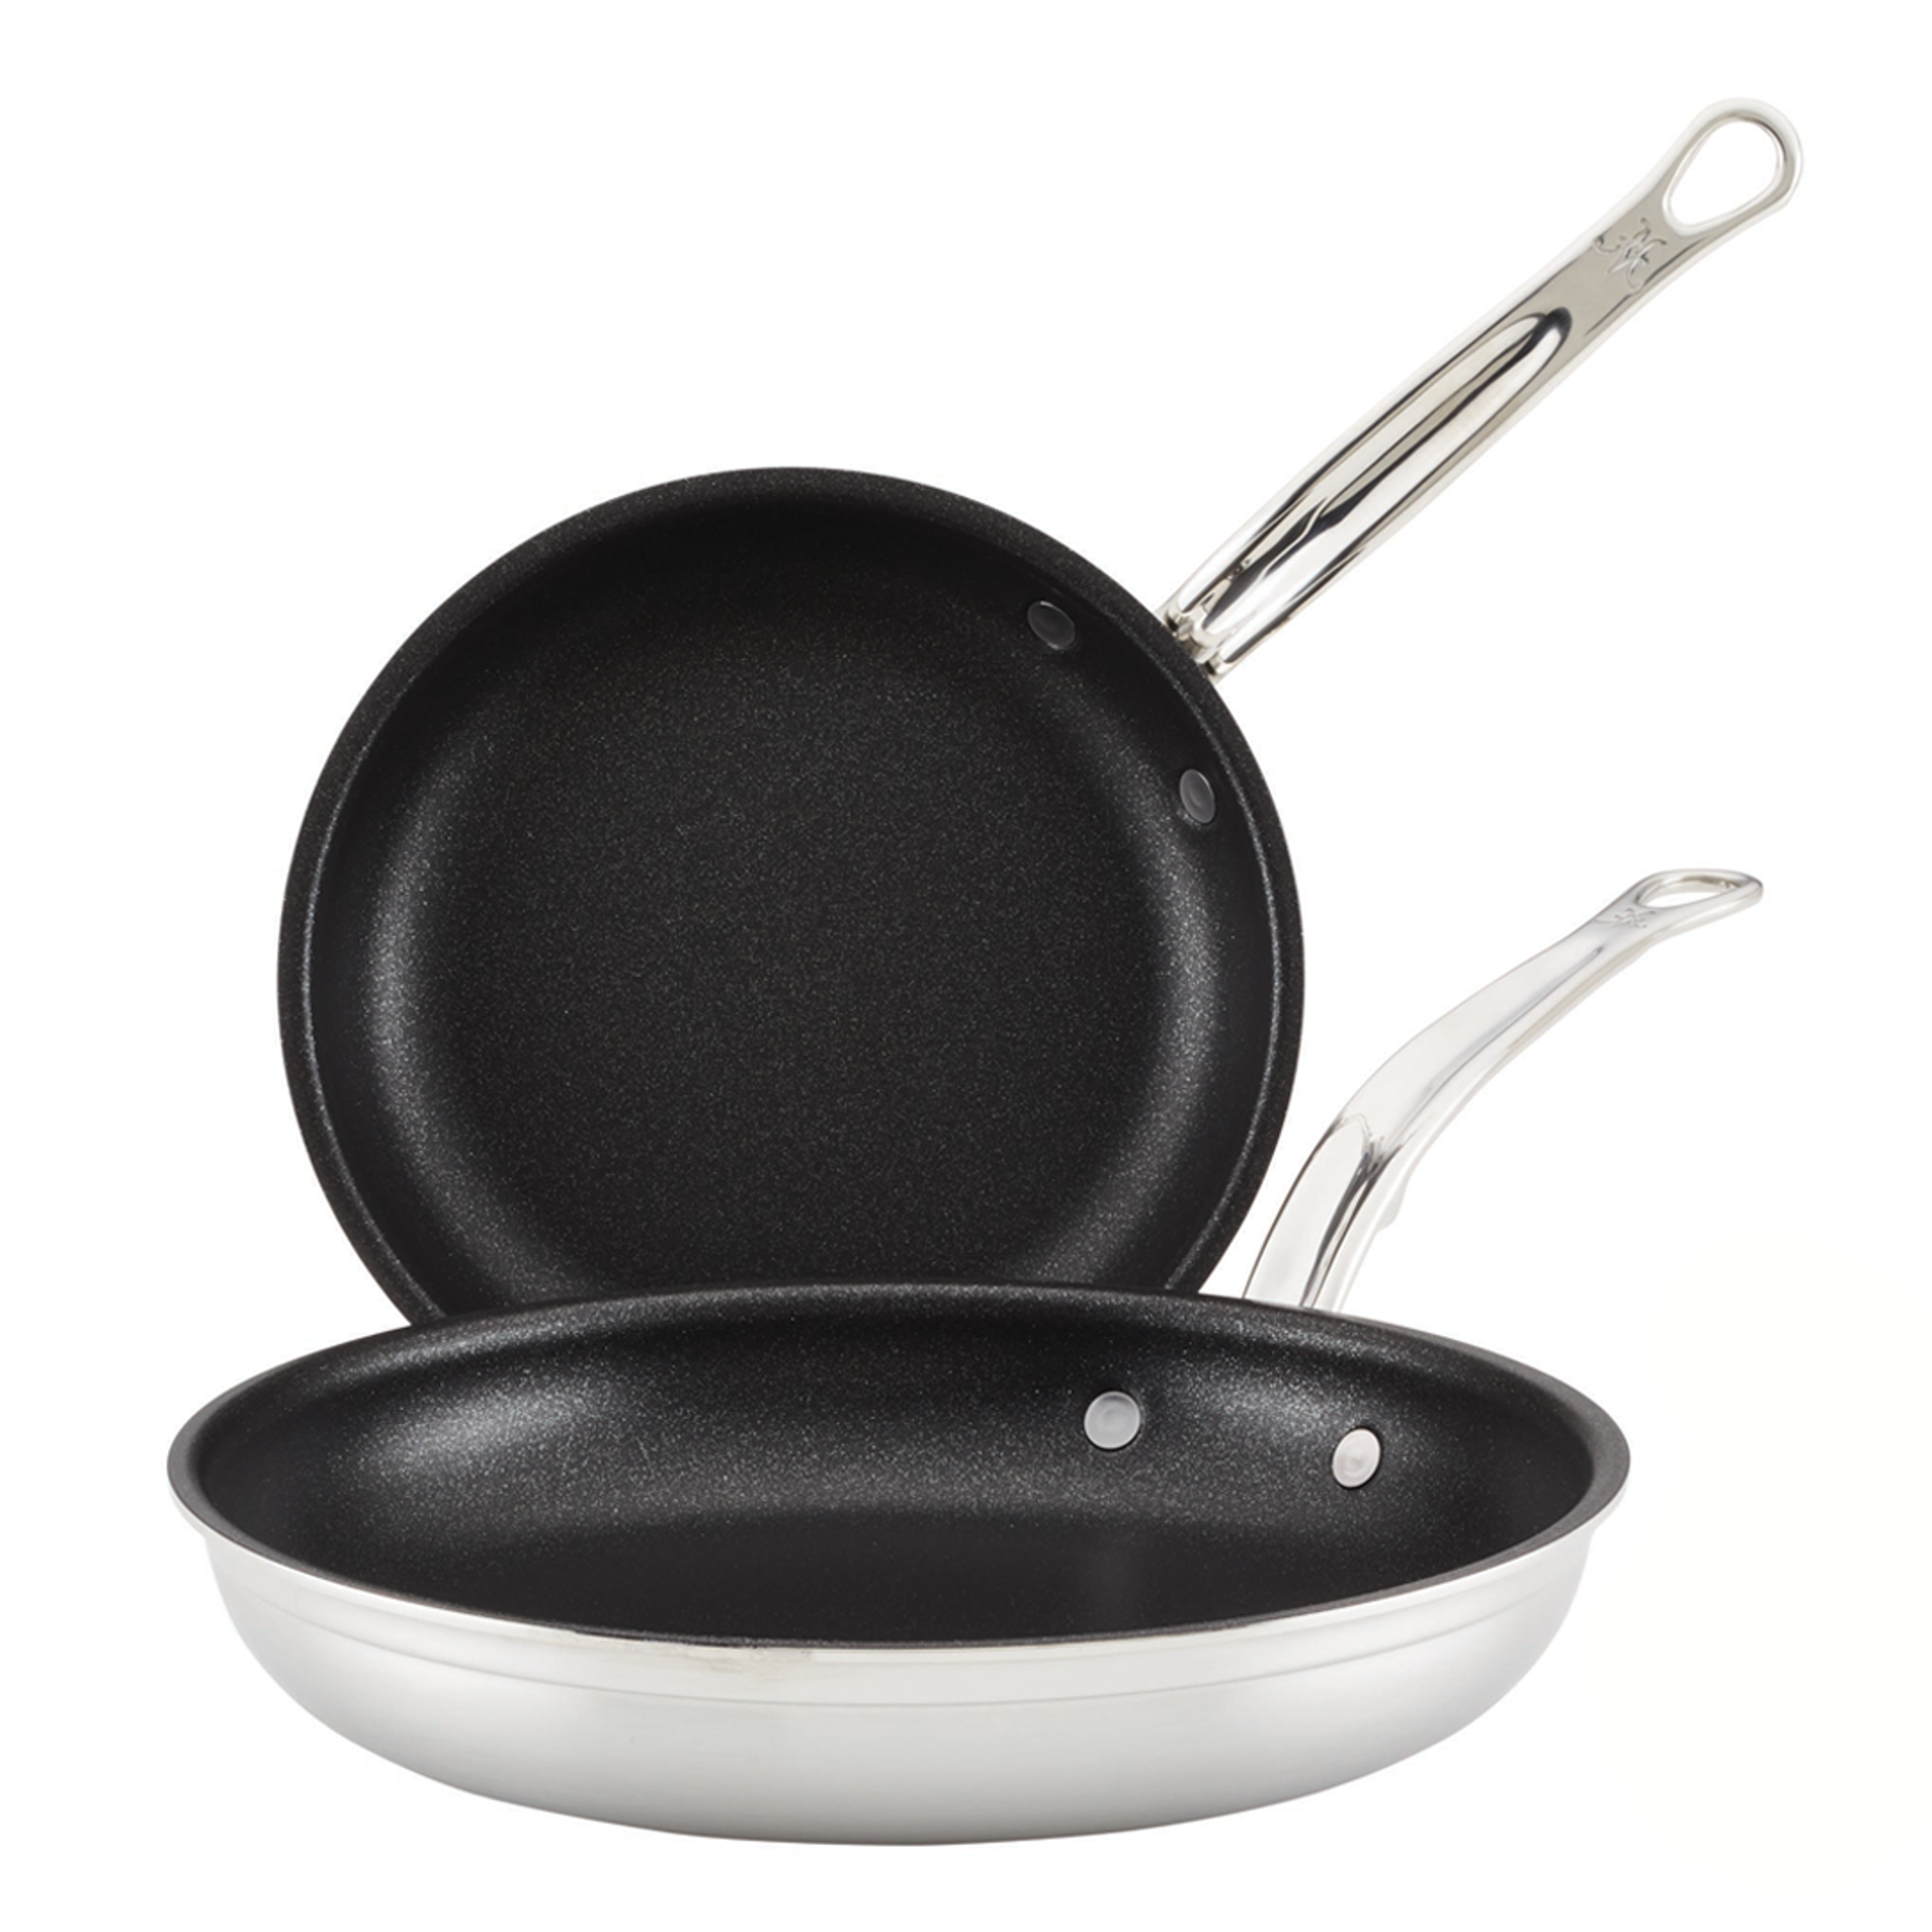 Professional Clad Stainless Steel TITUM Nonstick 2-pc Skillet Set